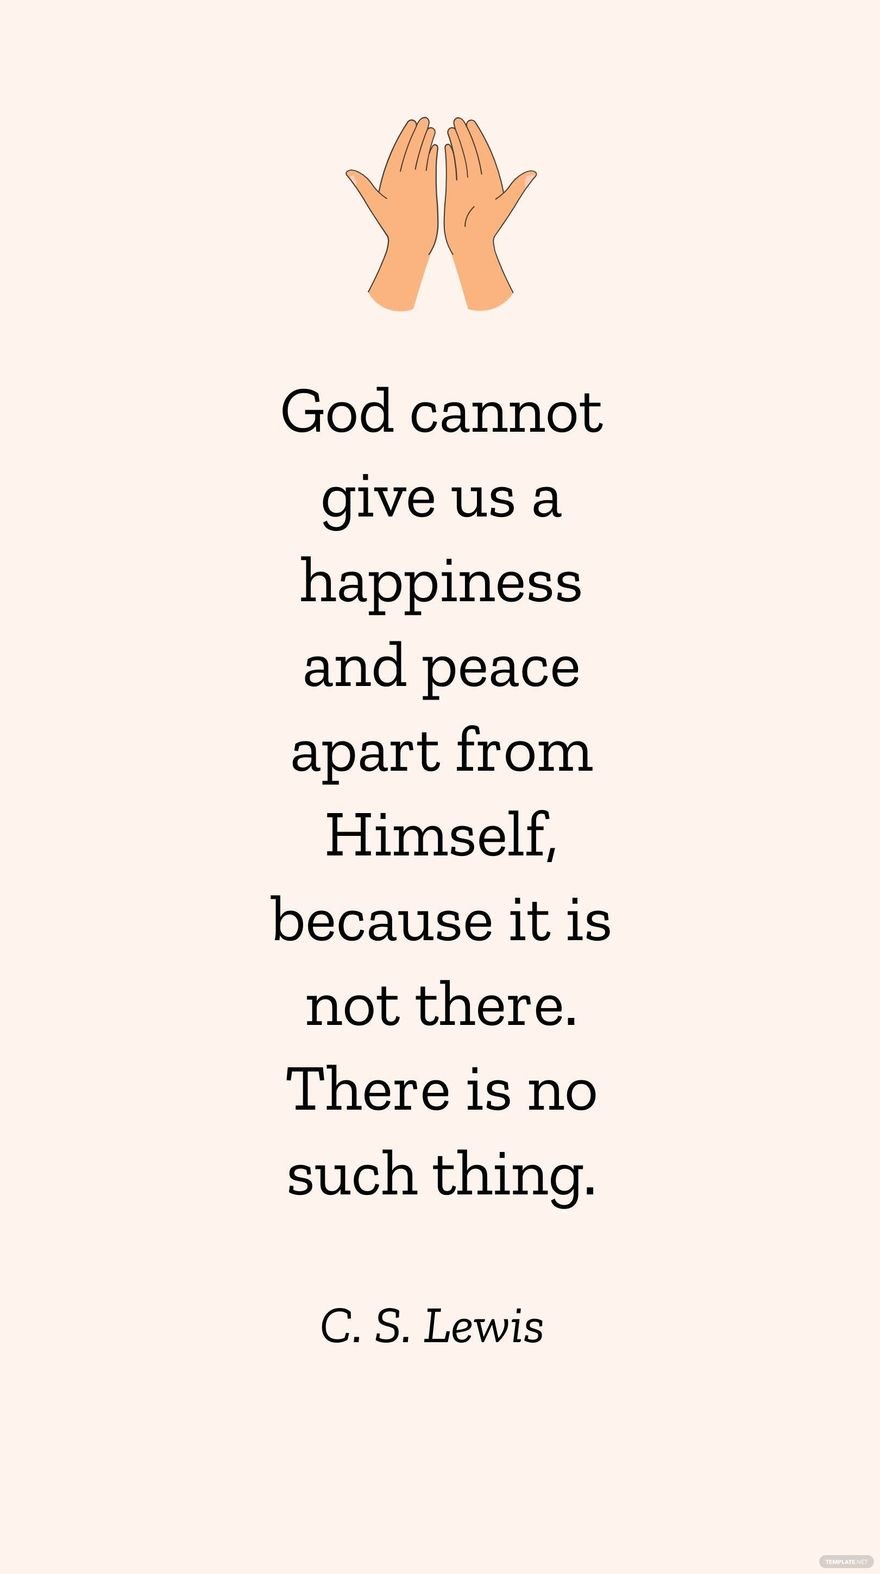 Free C. S. Lewis - God cannot give us a happiness and peace apart from Himself, because it is not there. There is no such thing.  in JPG